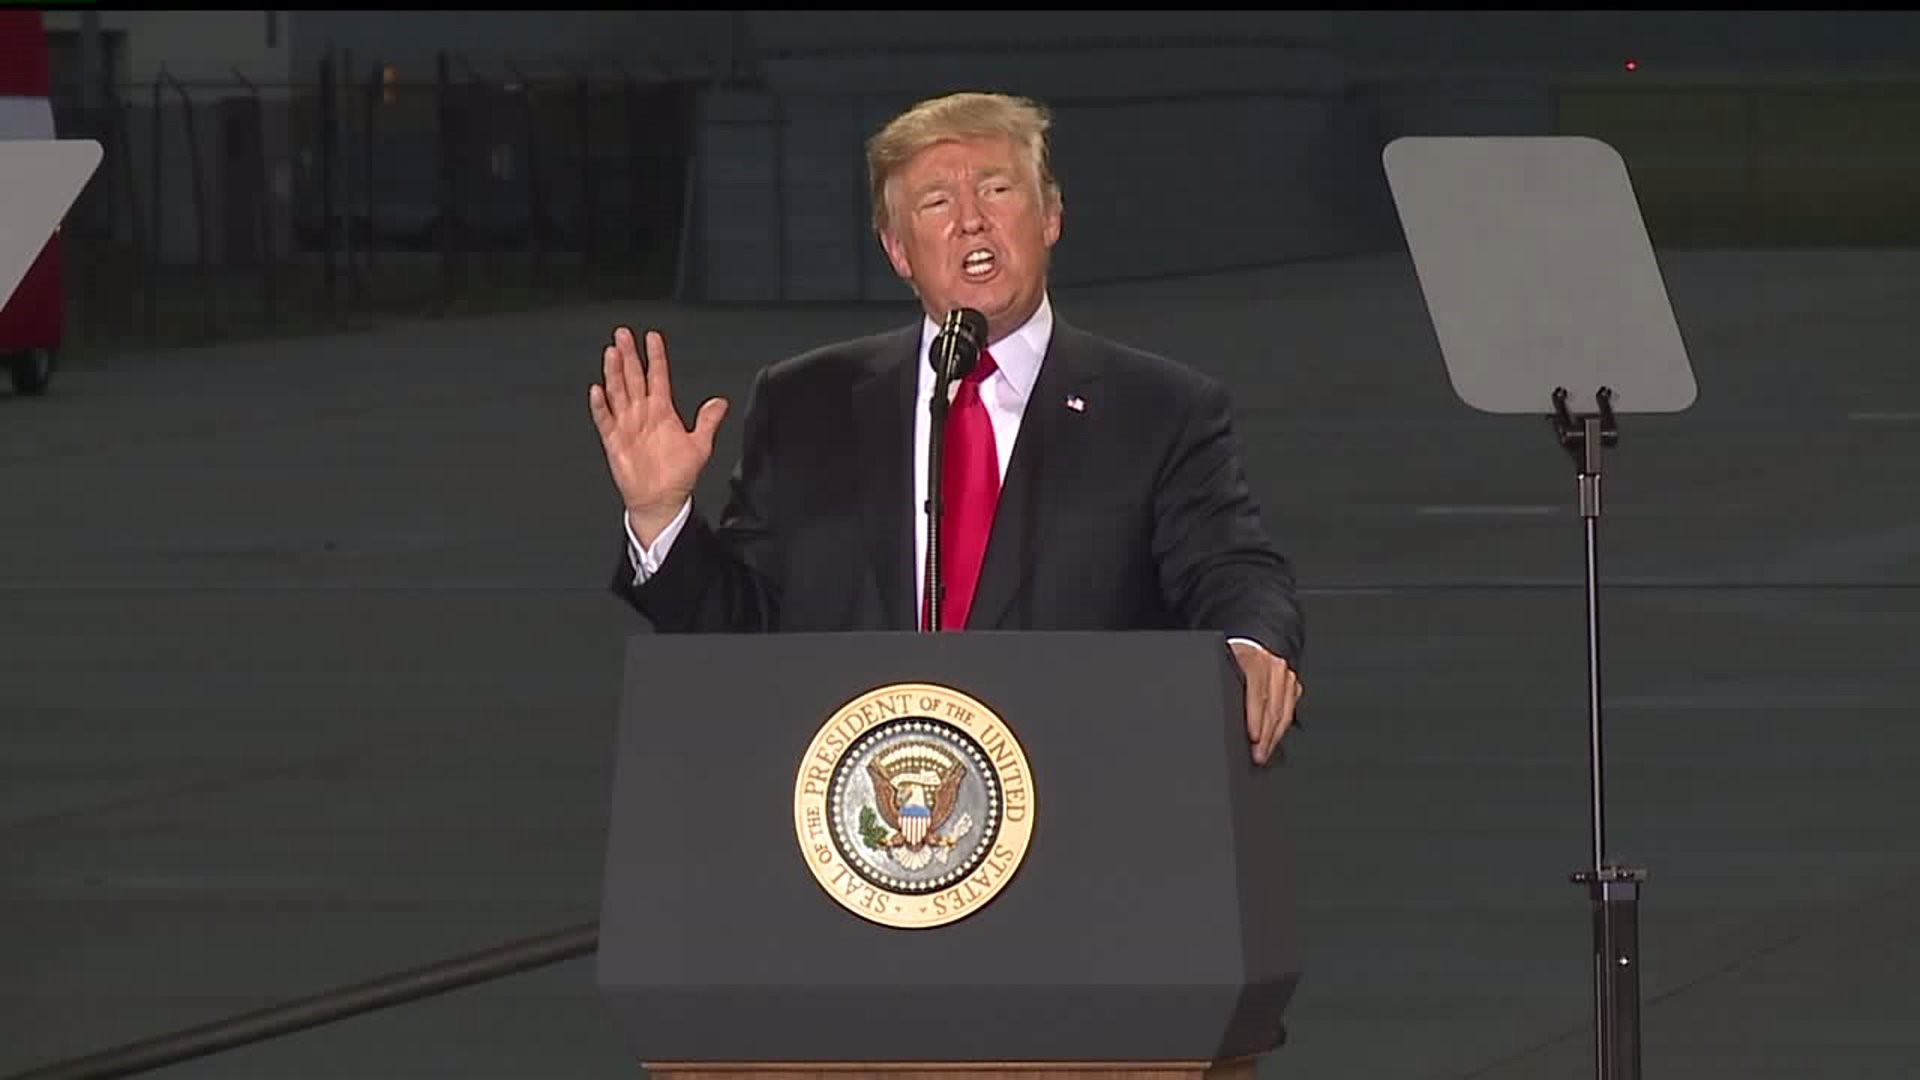 President Trump pushes tax reform plan in Dauphin County